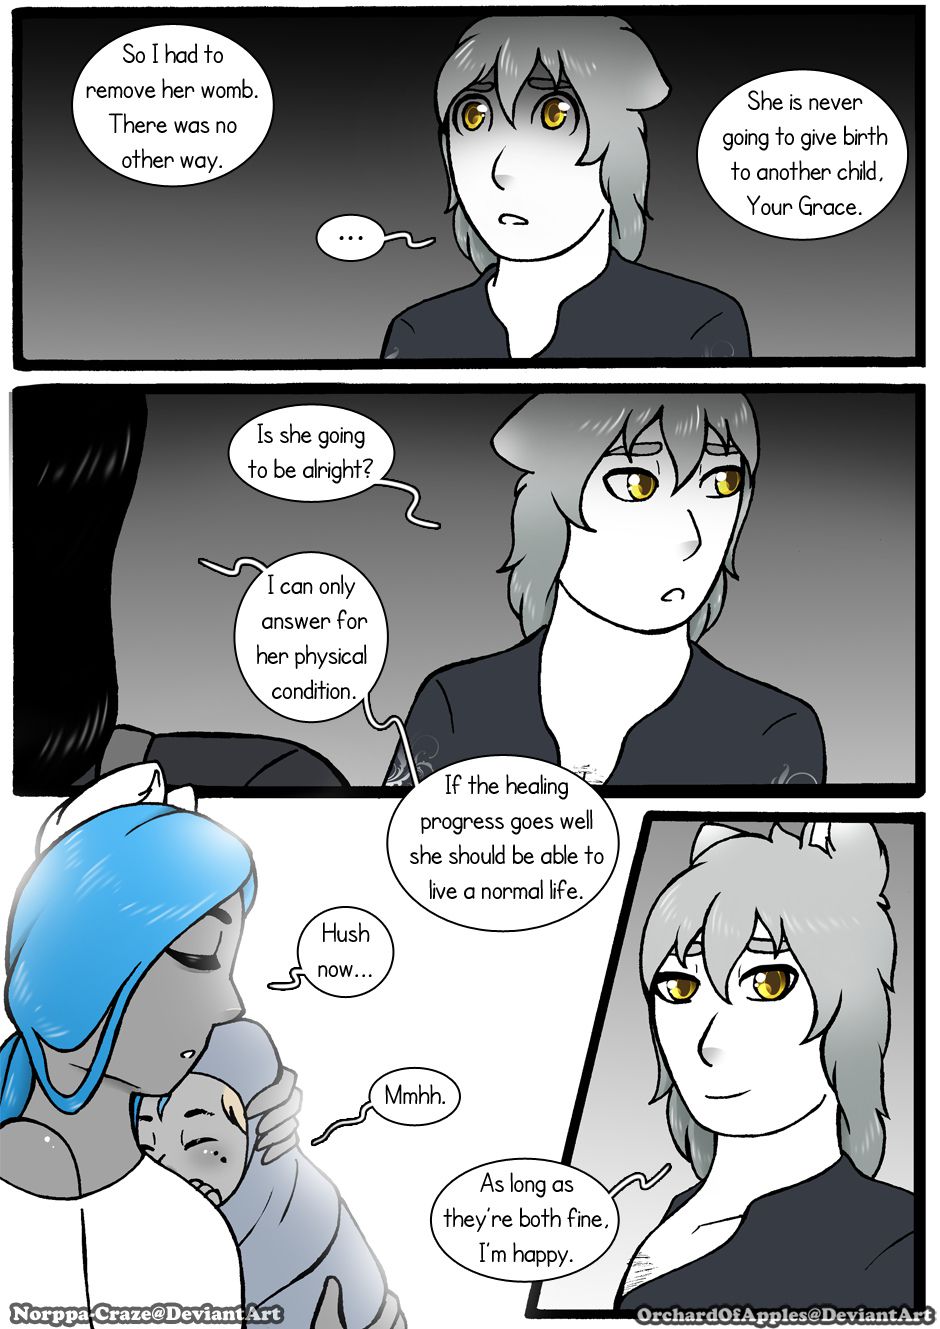 [Jeny-jen94] Between Kings and Queens [Ongoing] 335